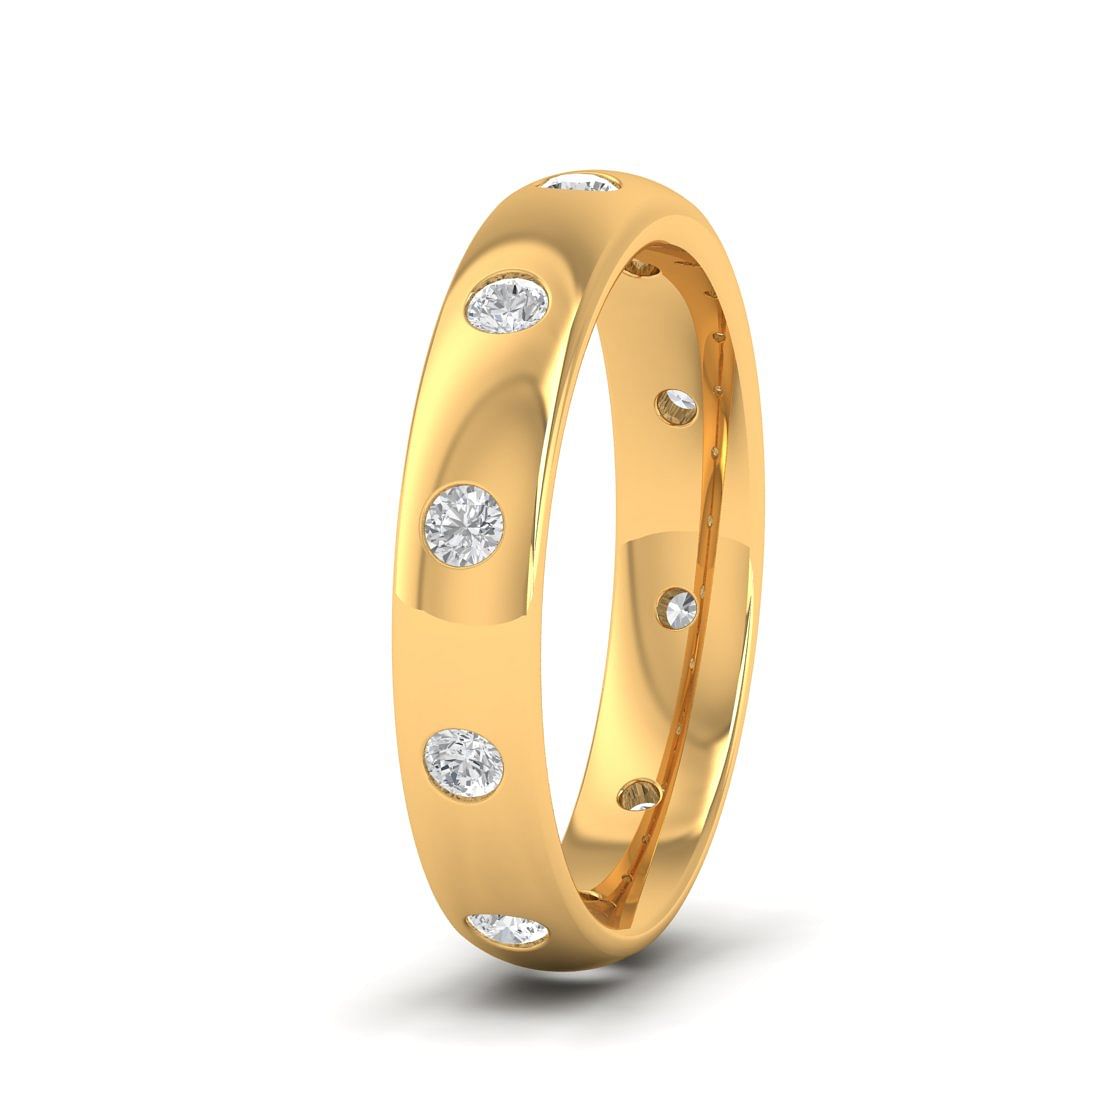 Wedding Diamond Ring With Yellow Gold For Her